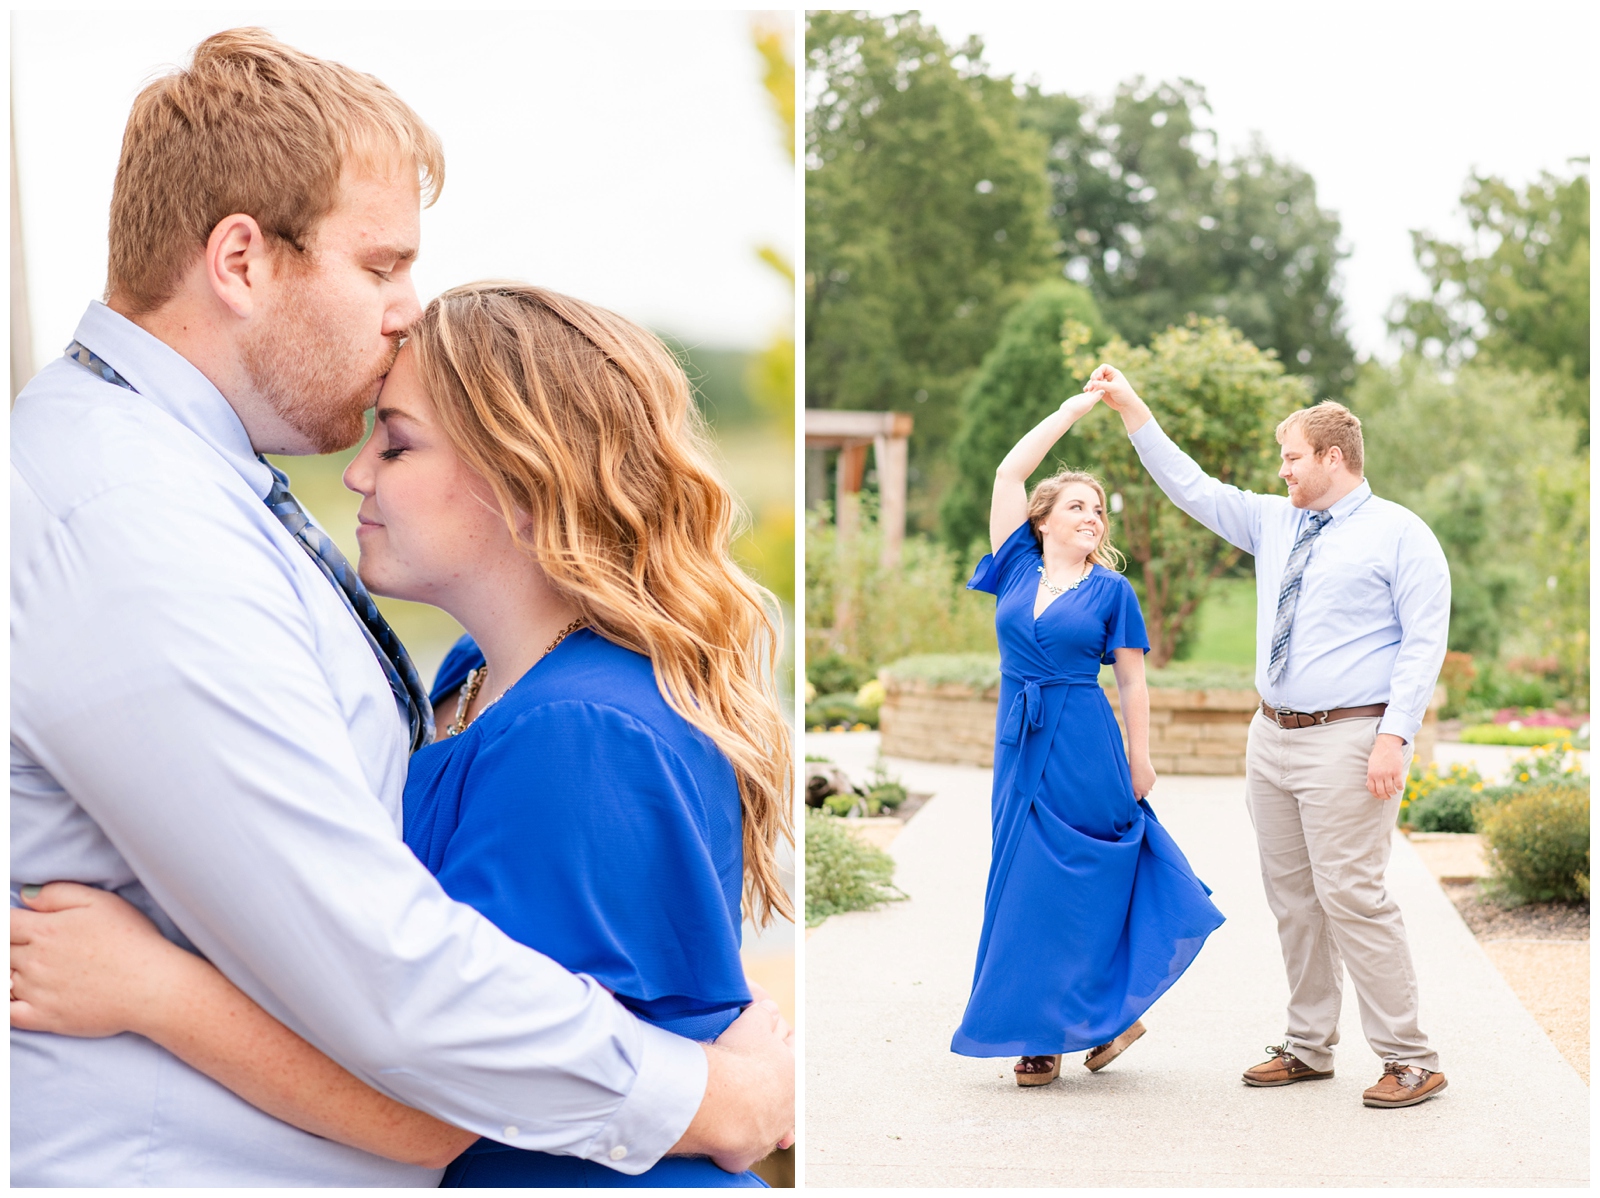 groom twirls bride-to-be in bright blue dress with brown sandal wedges during engagement portraits at Dawes Arboretum